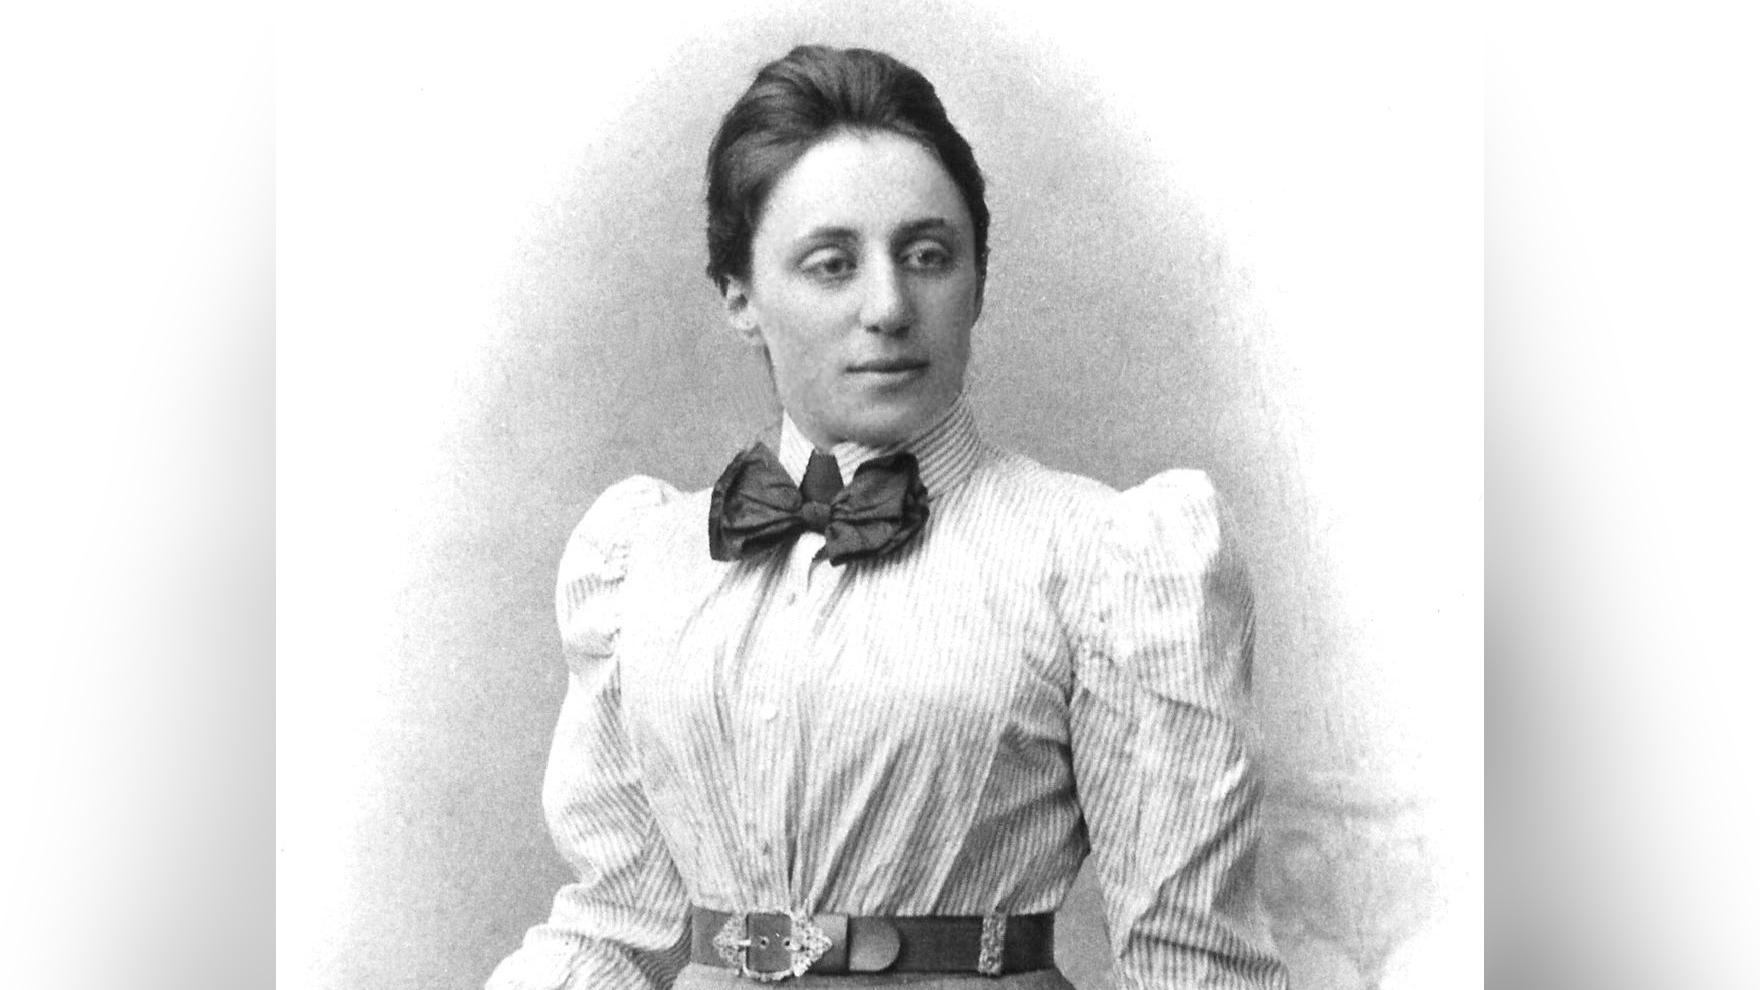 German mathematician Emmy Noether (shown here in this portrait) was born on March 23, 1882, in Erlangen, Germany, and died April 14, 1935, in Bryn Mawr, Pennsylvania.